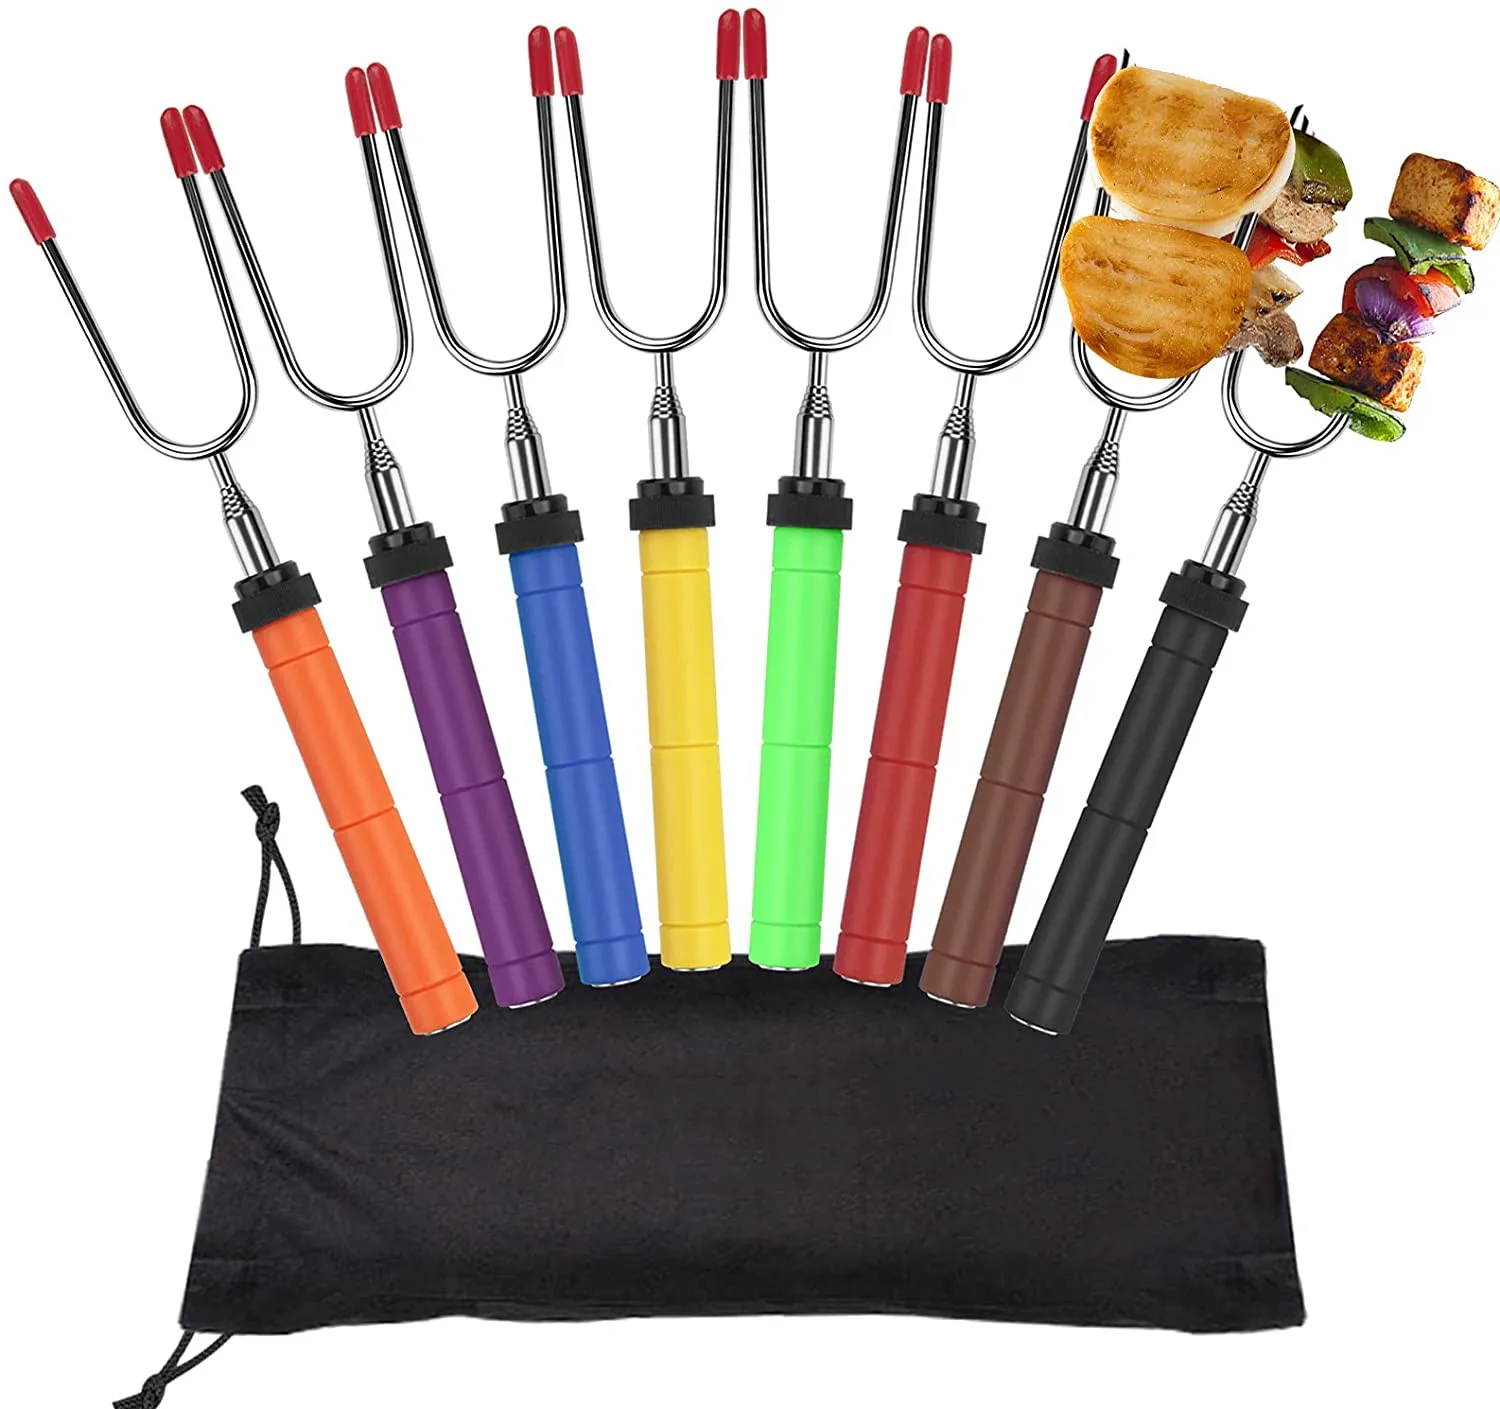 BBQ Forks Stainless Steel Smore Skewers with Wooden Handle, Telescoping Smores Roasting Sticks for Fire Pit